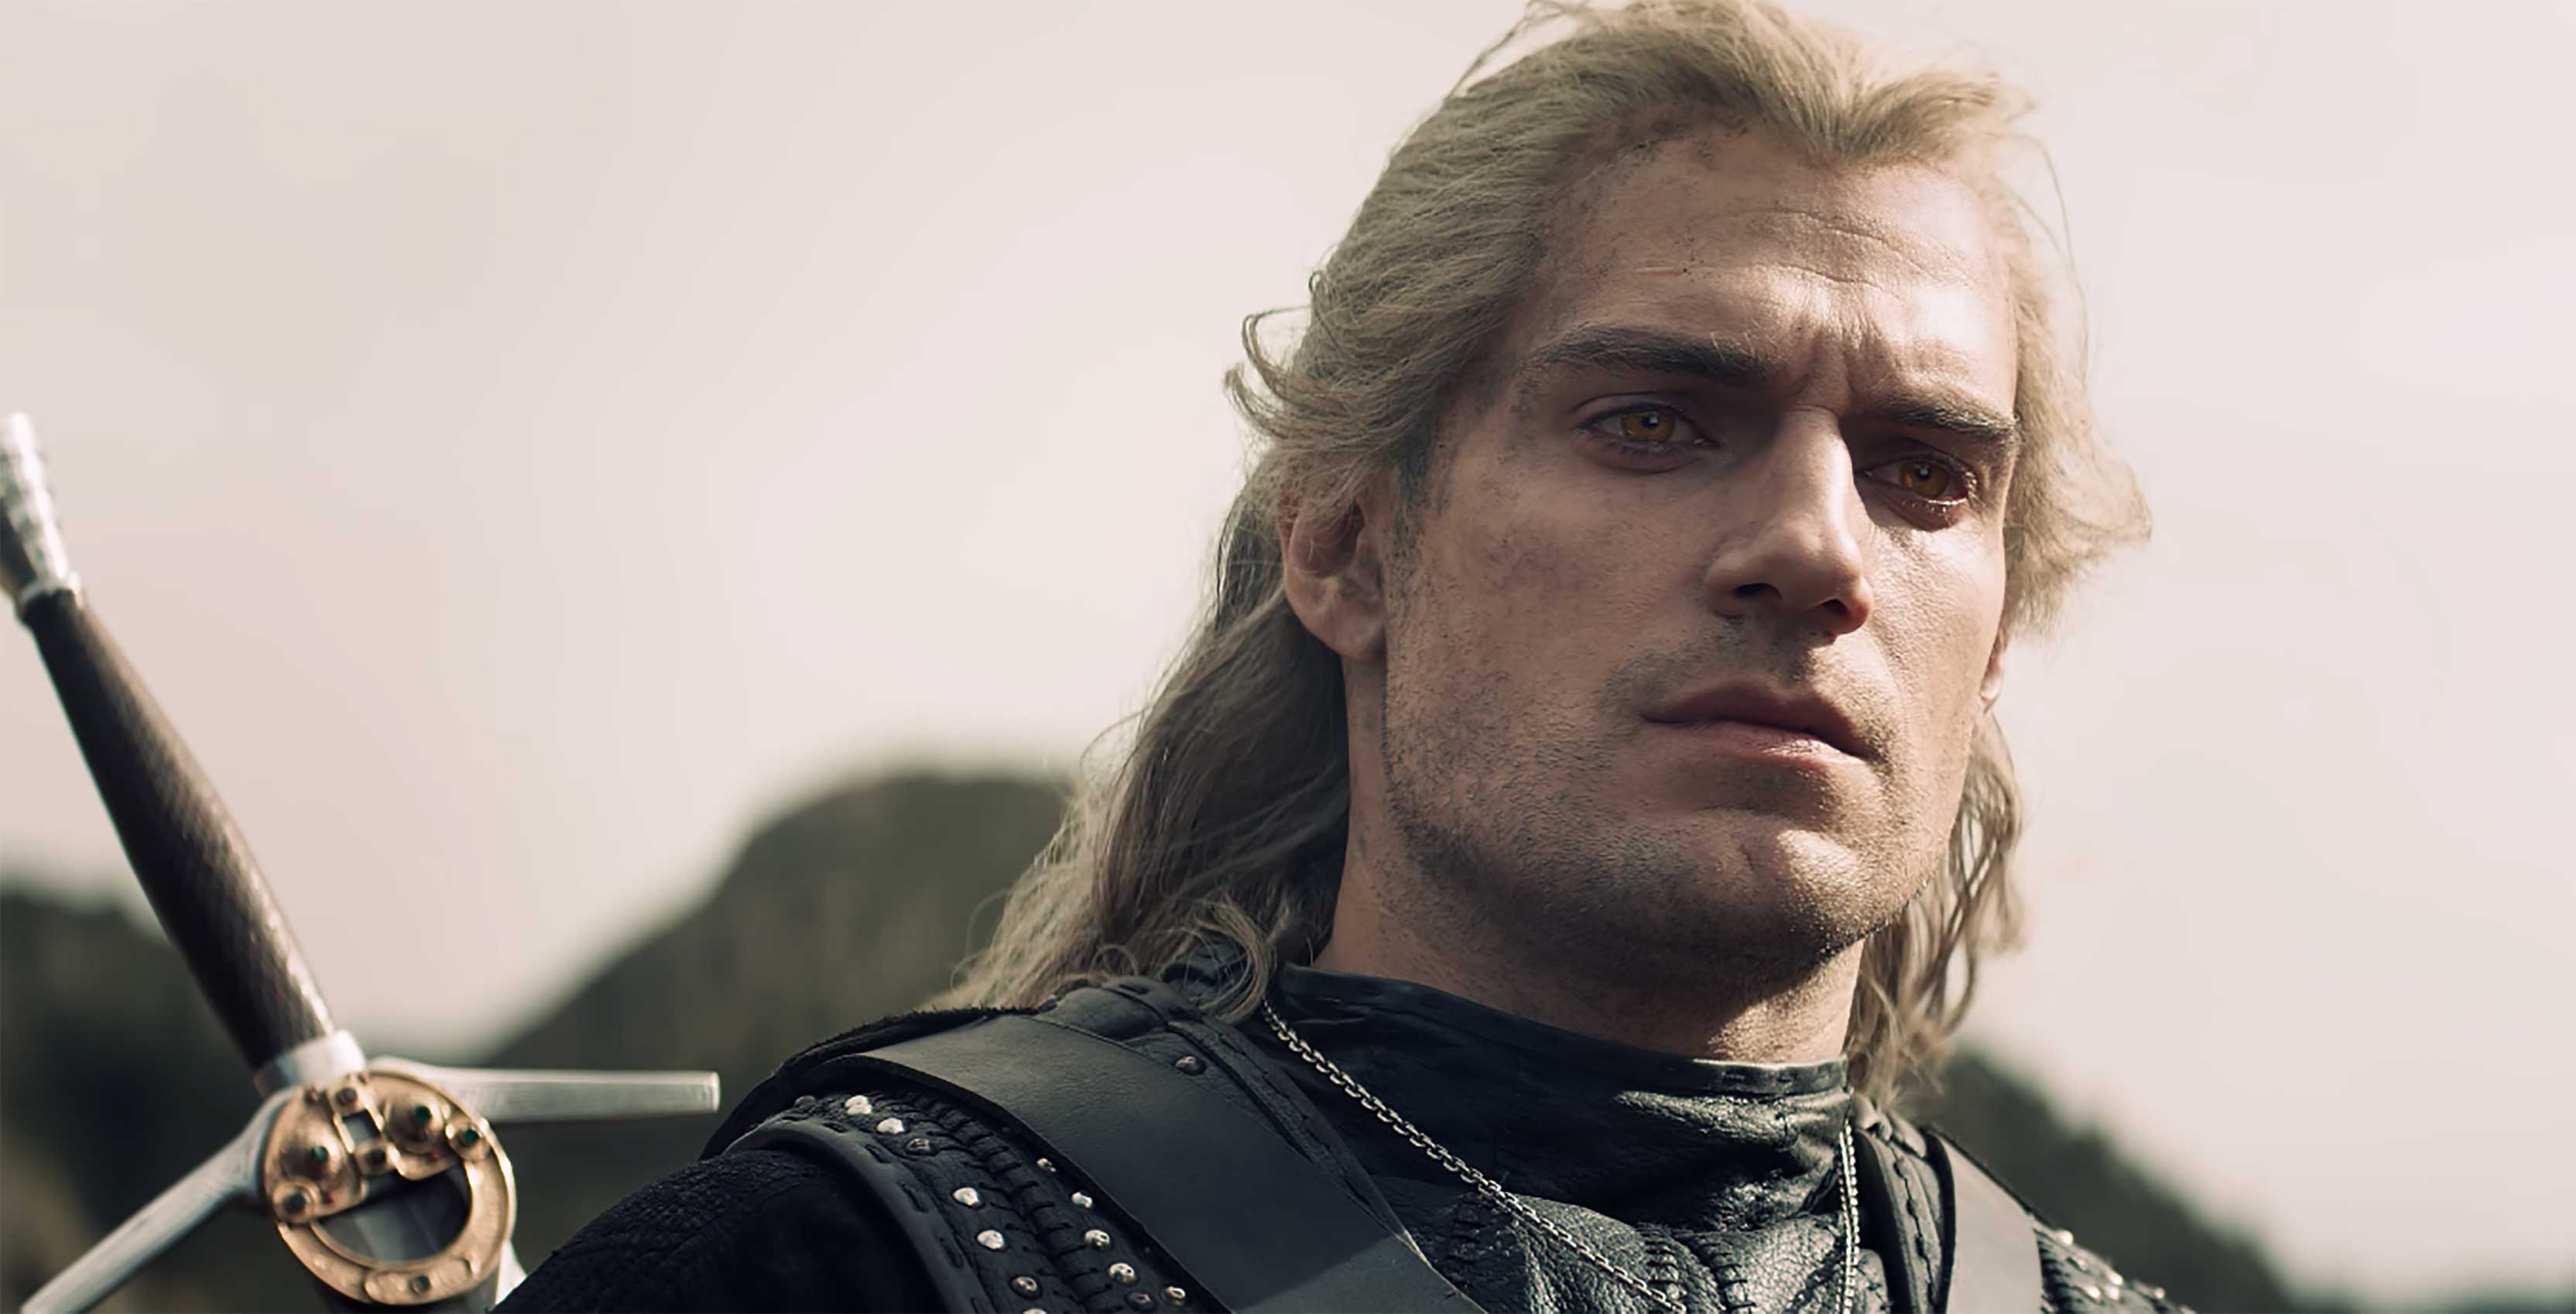 The Witcher Netflix series: A guide to the key people and locations